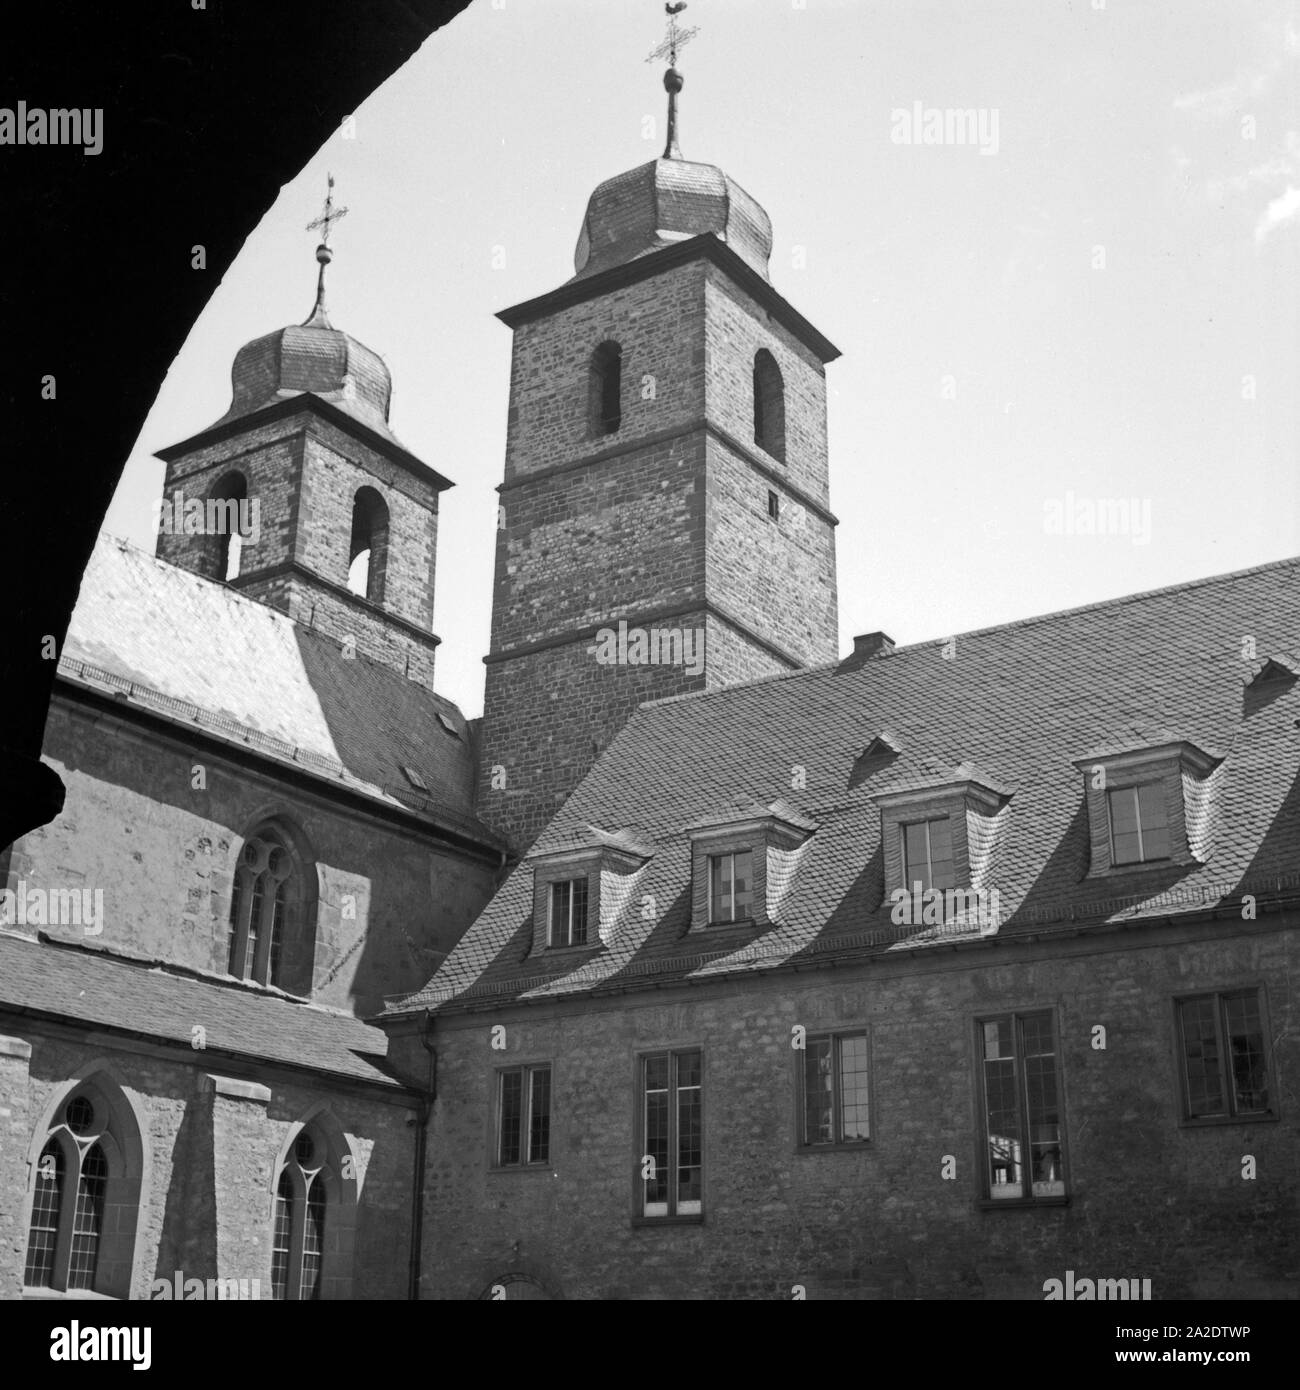 Die Türme der Andreaskirche in Worms, Deutschland 1930er Jahre. Belfries of St. Andrew's church at Worms, Germany 1930s. Stock Photo